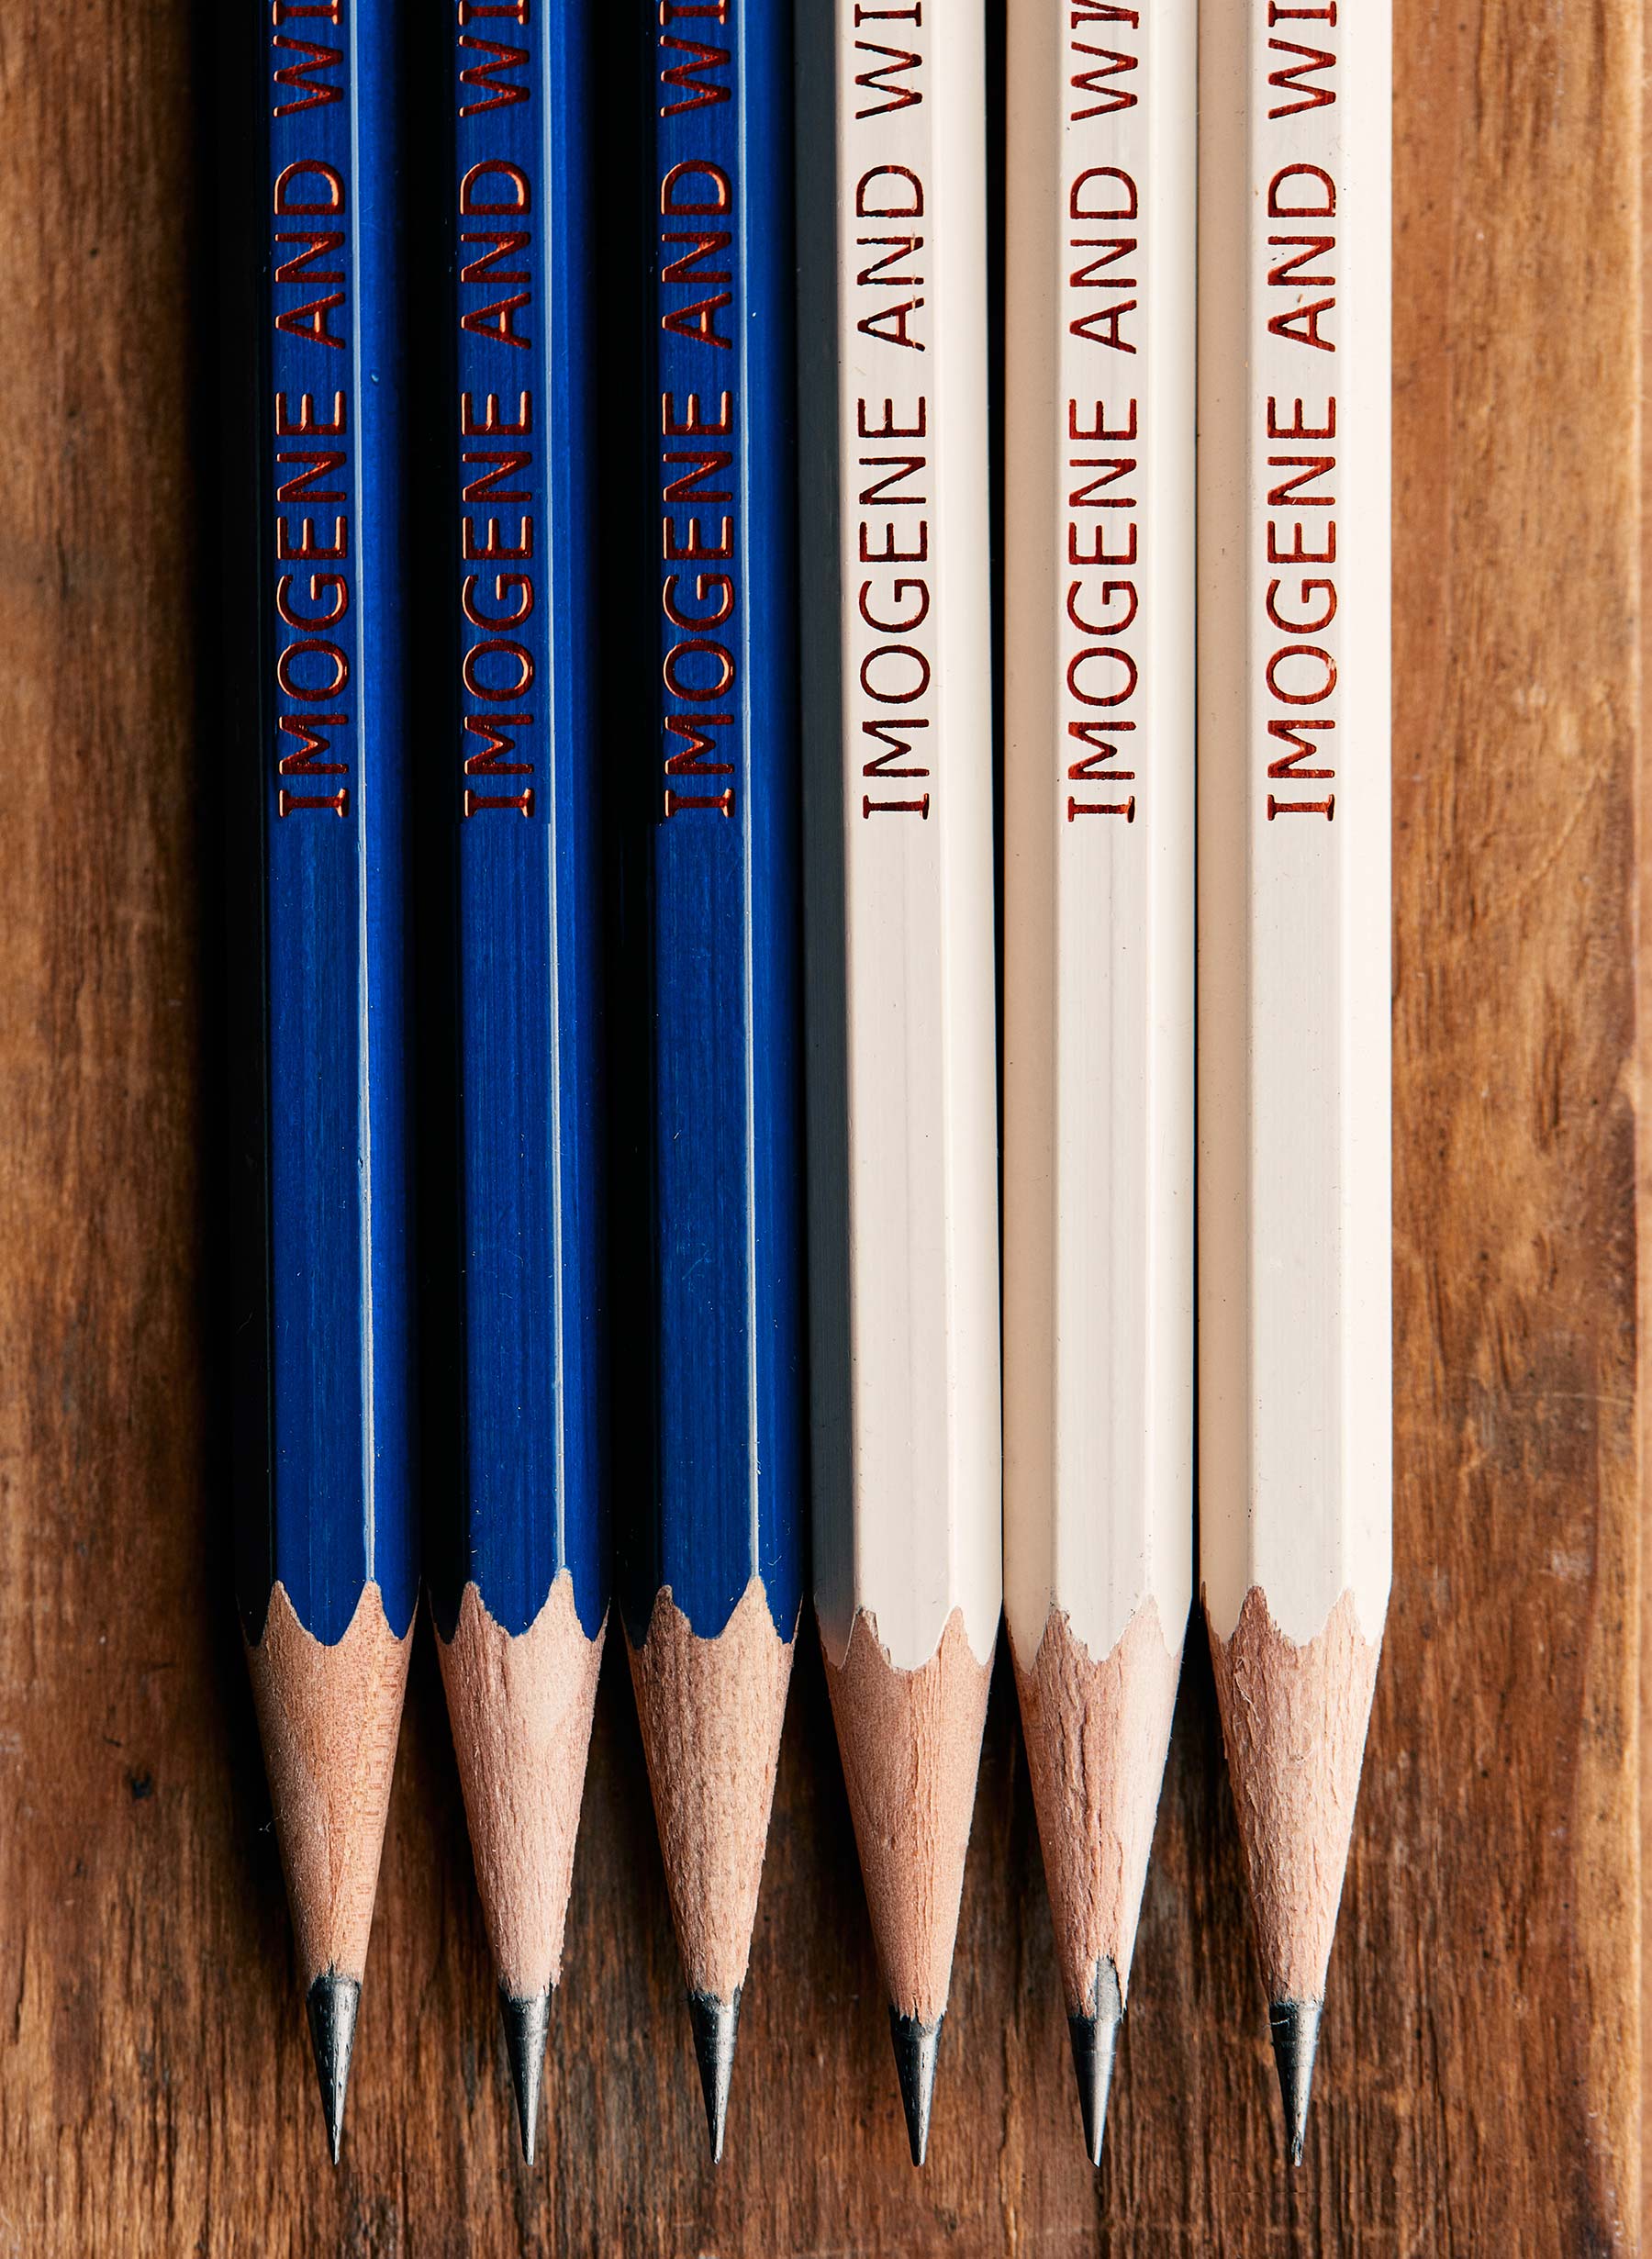 Wood, Book, Writing implement, Font, Office supplies, Publication, Electric blue, Pencil, Stationery